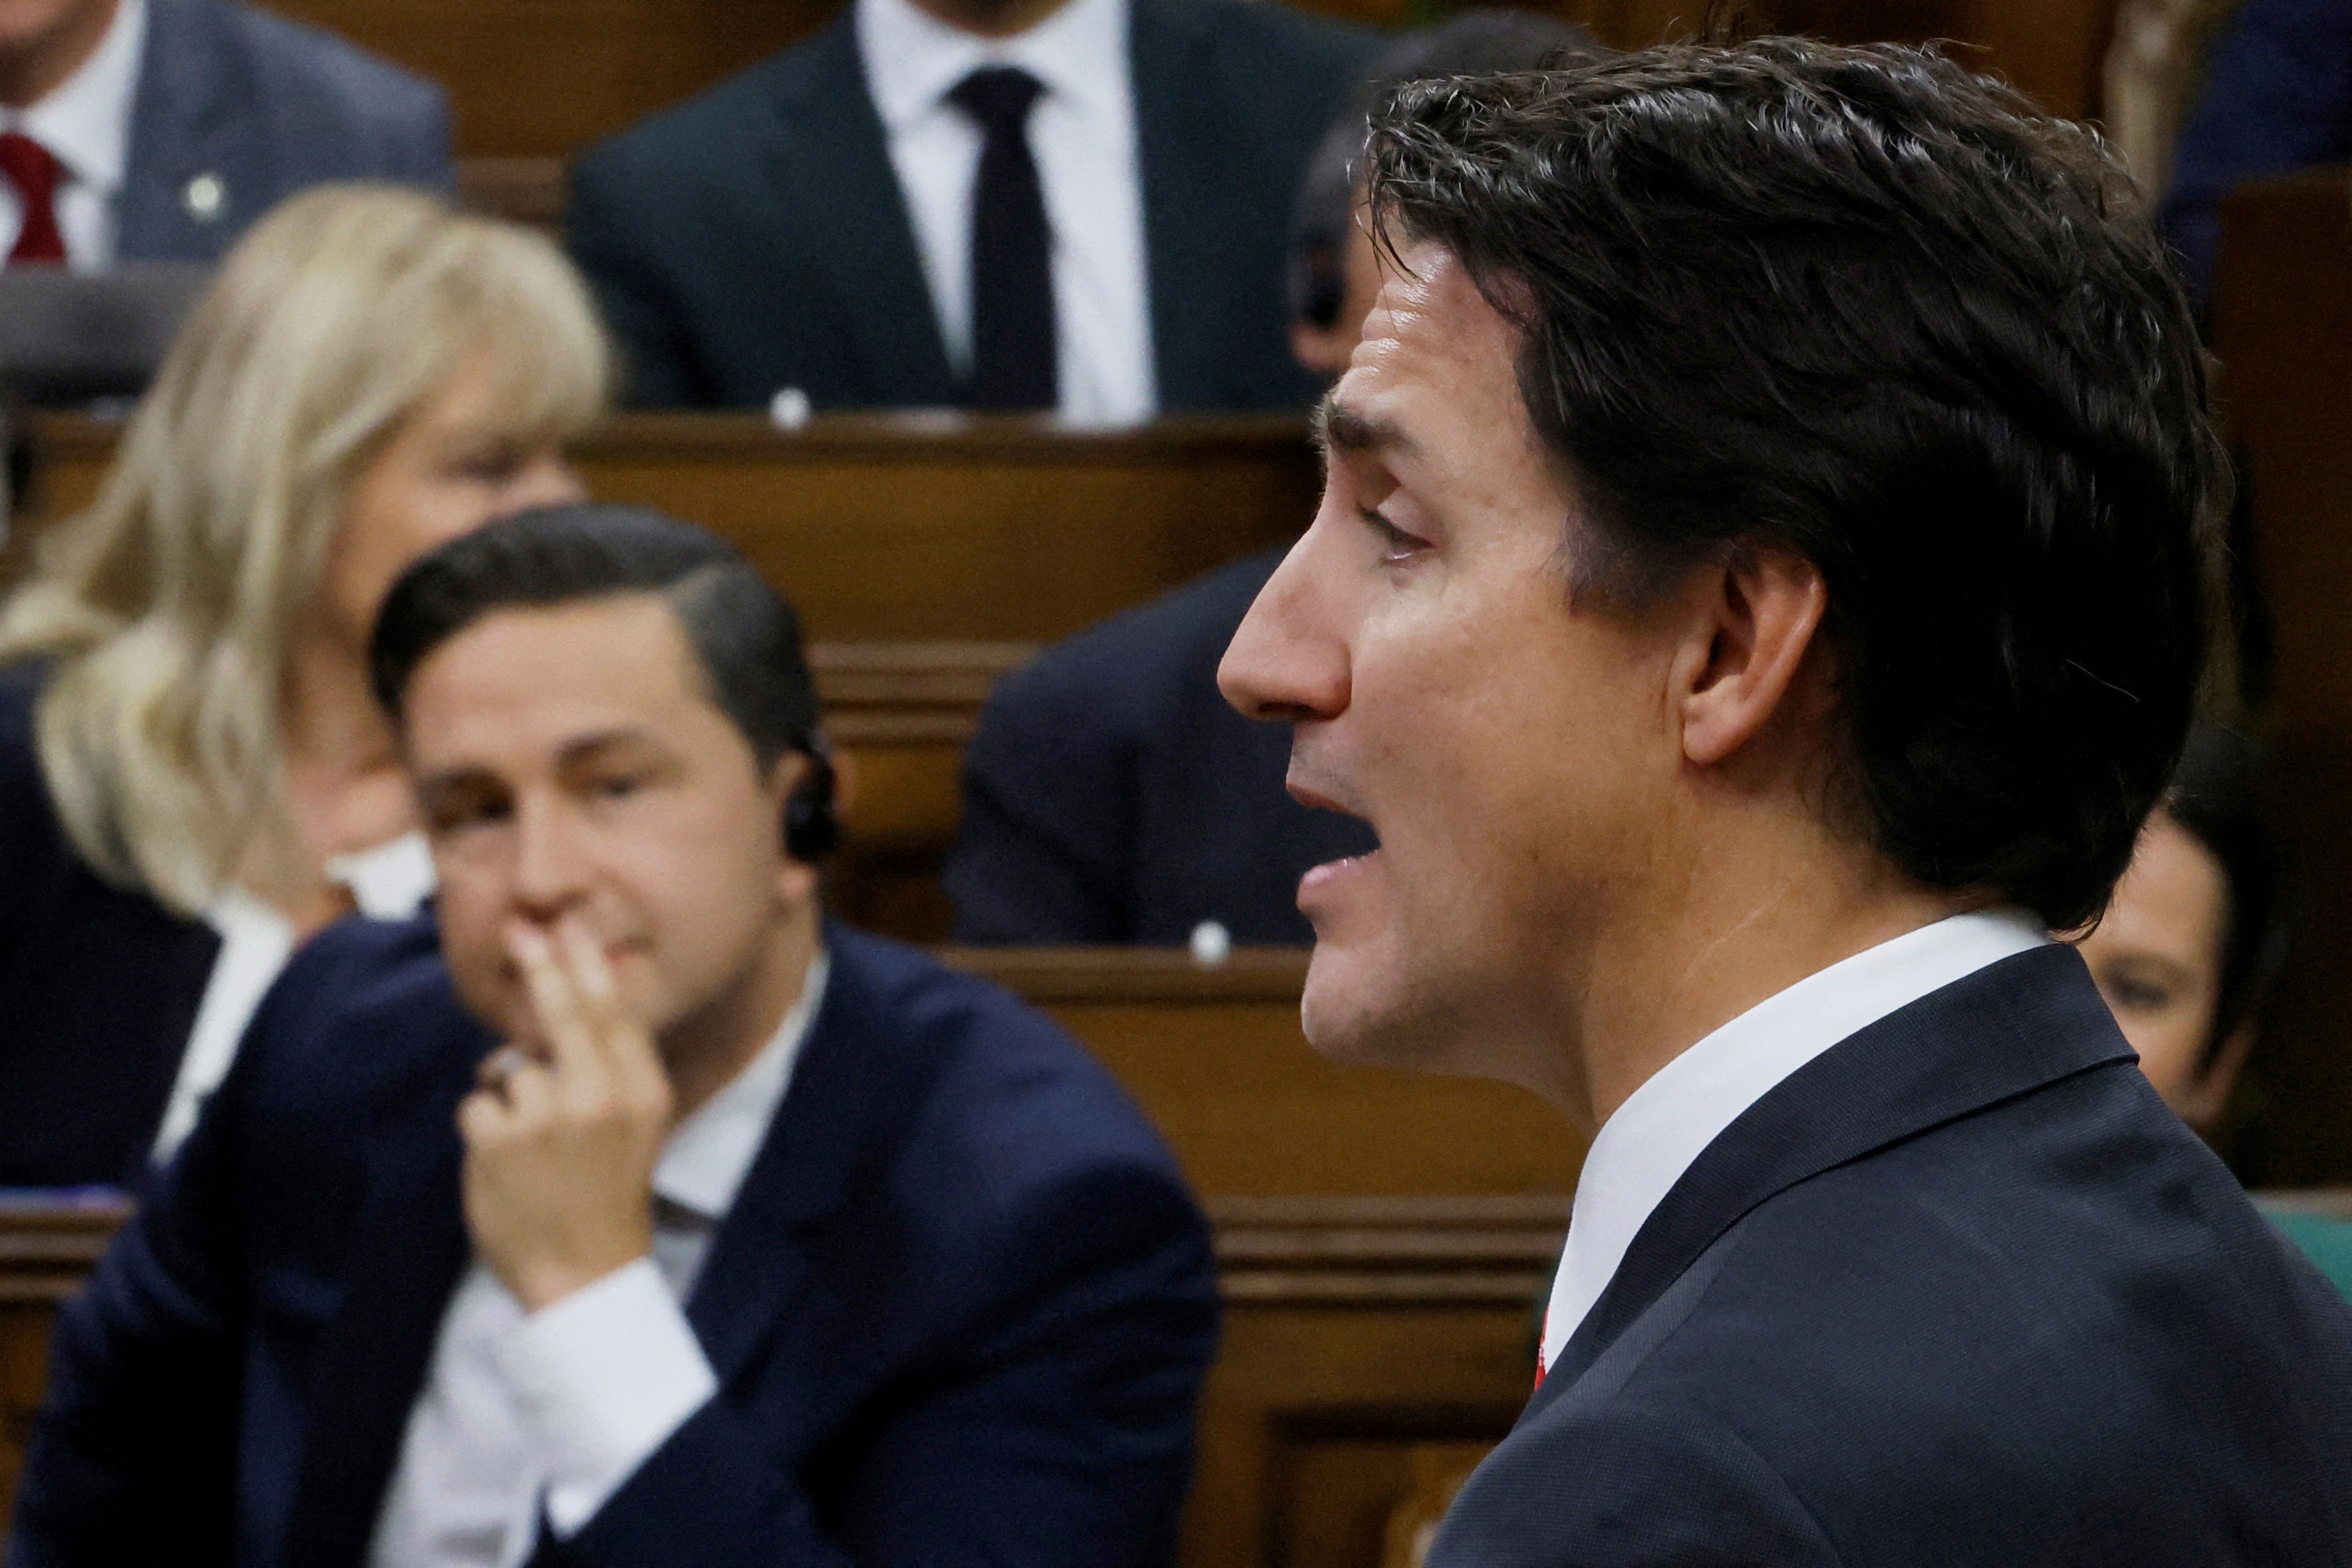 Canada's Prime Minister Justin Trudeau speaks as Conservative Party of Canada leader Pierre Poilievre listens during Question Period in the House of Commons on Parliament Hill in Ottawa